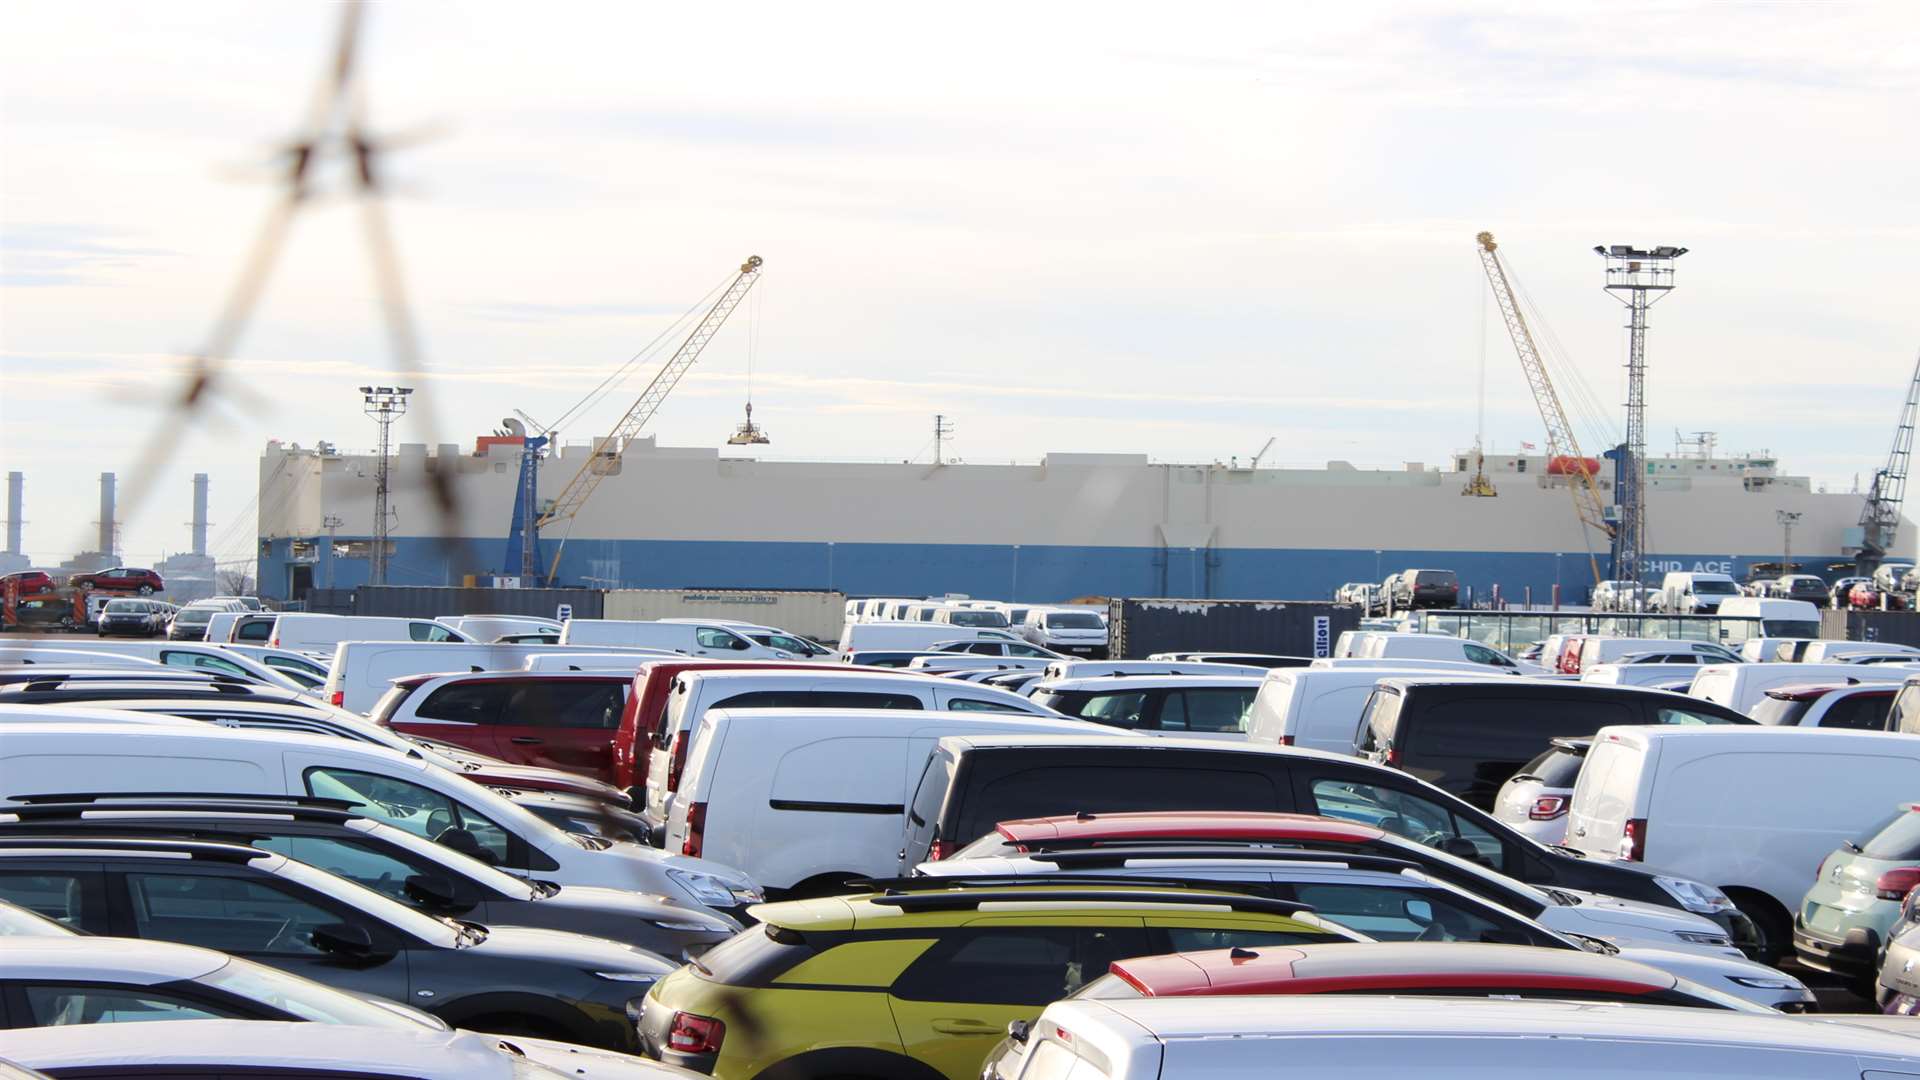 Sheerness imports 400,000 cars a year